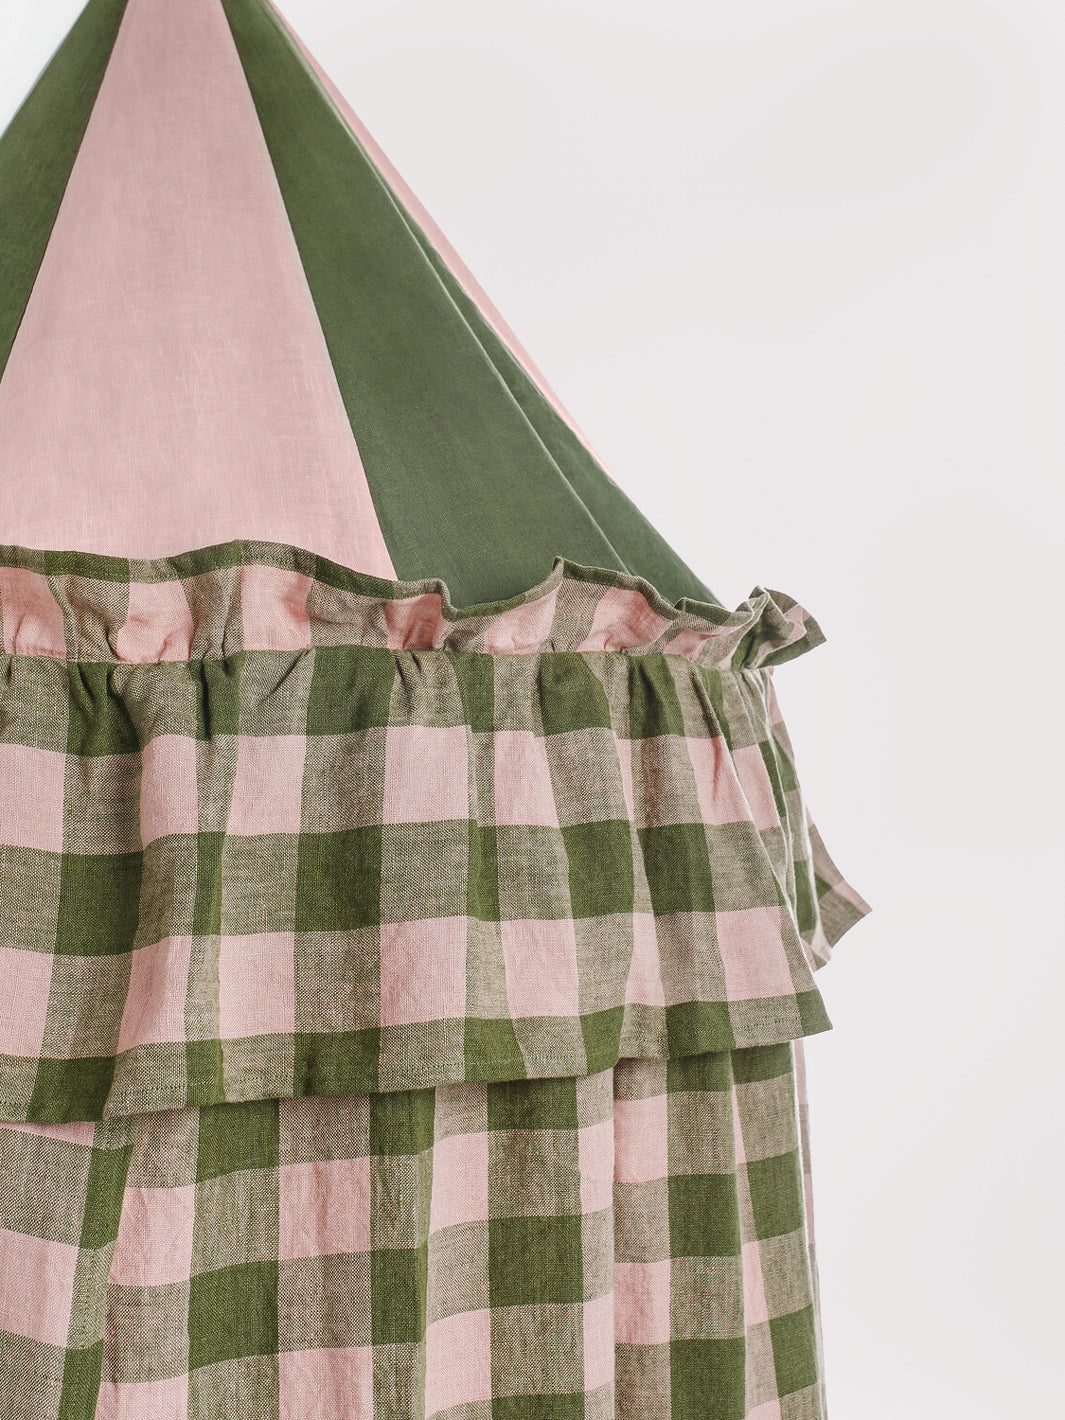 Canopy Gingham Olive